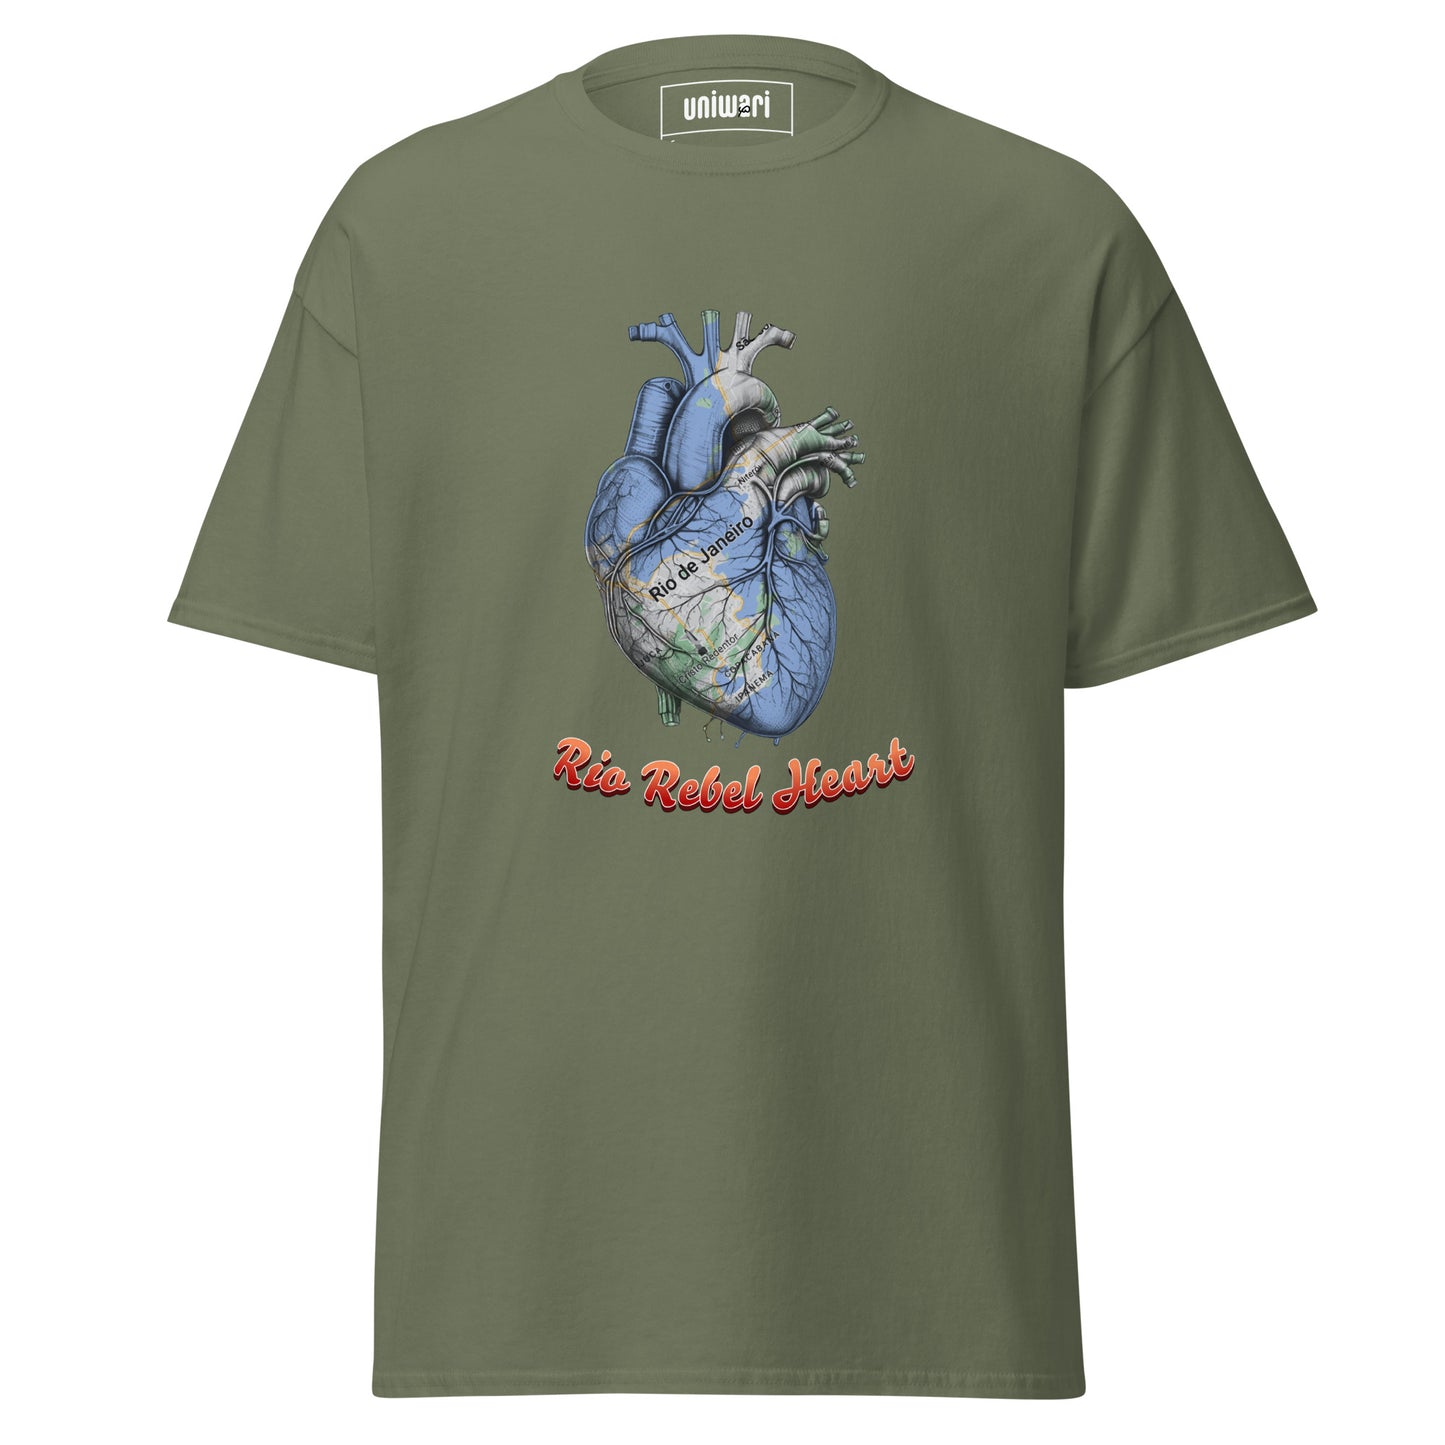 Green High Quality Tee - Front Design with a Heart Shaped Map of Rio de Janeiro and a Phrase "Rio Rebel Heart" print